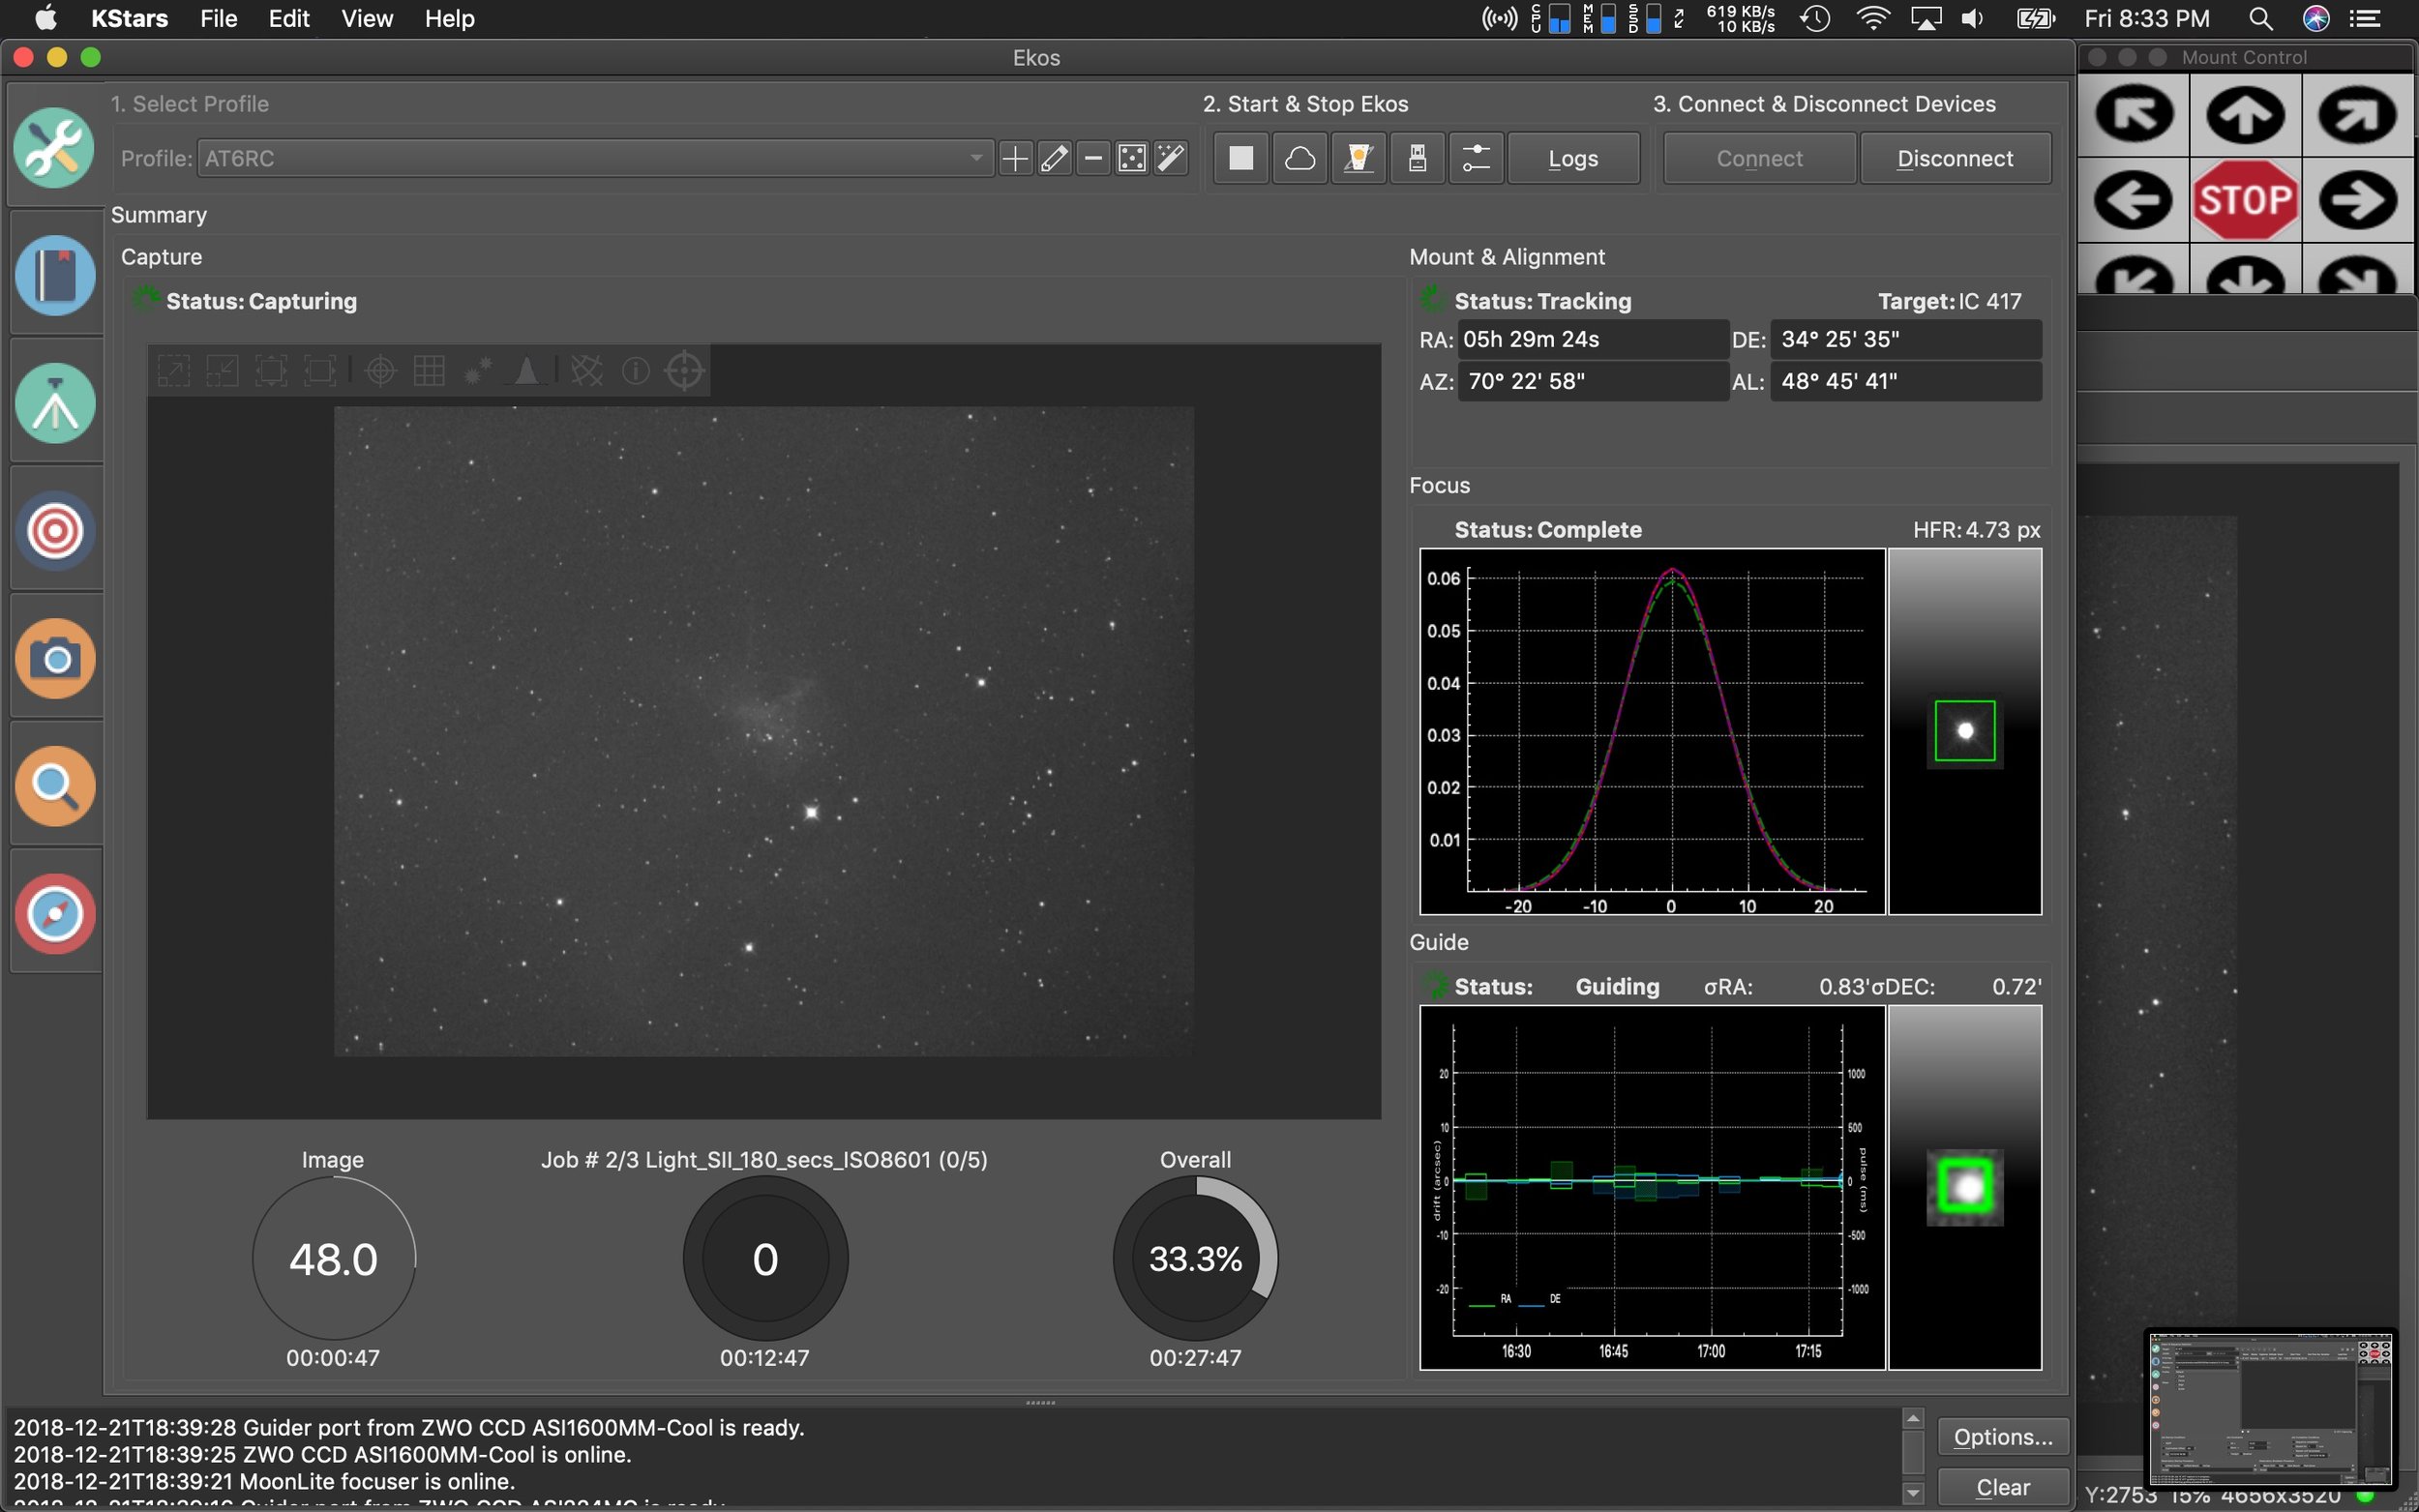 astronomy free download for mac os x used with nexstar 127 slt